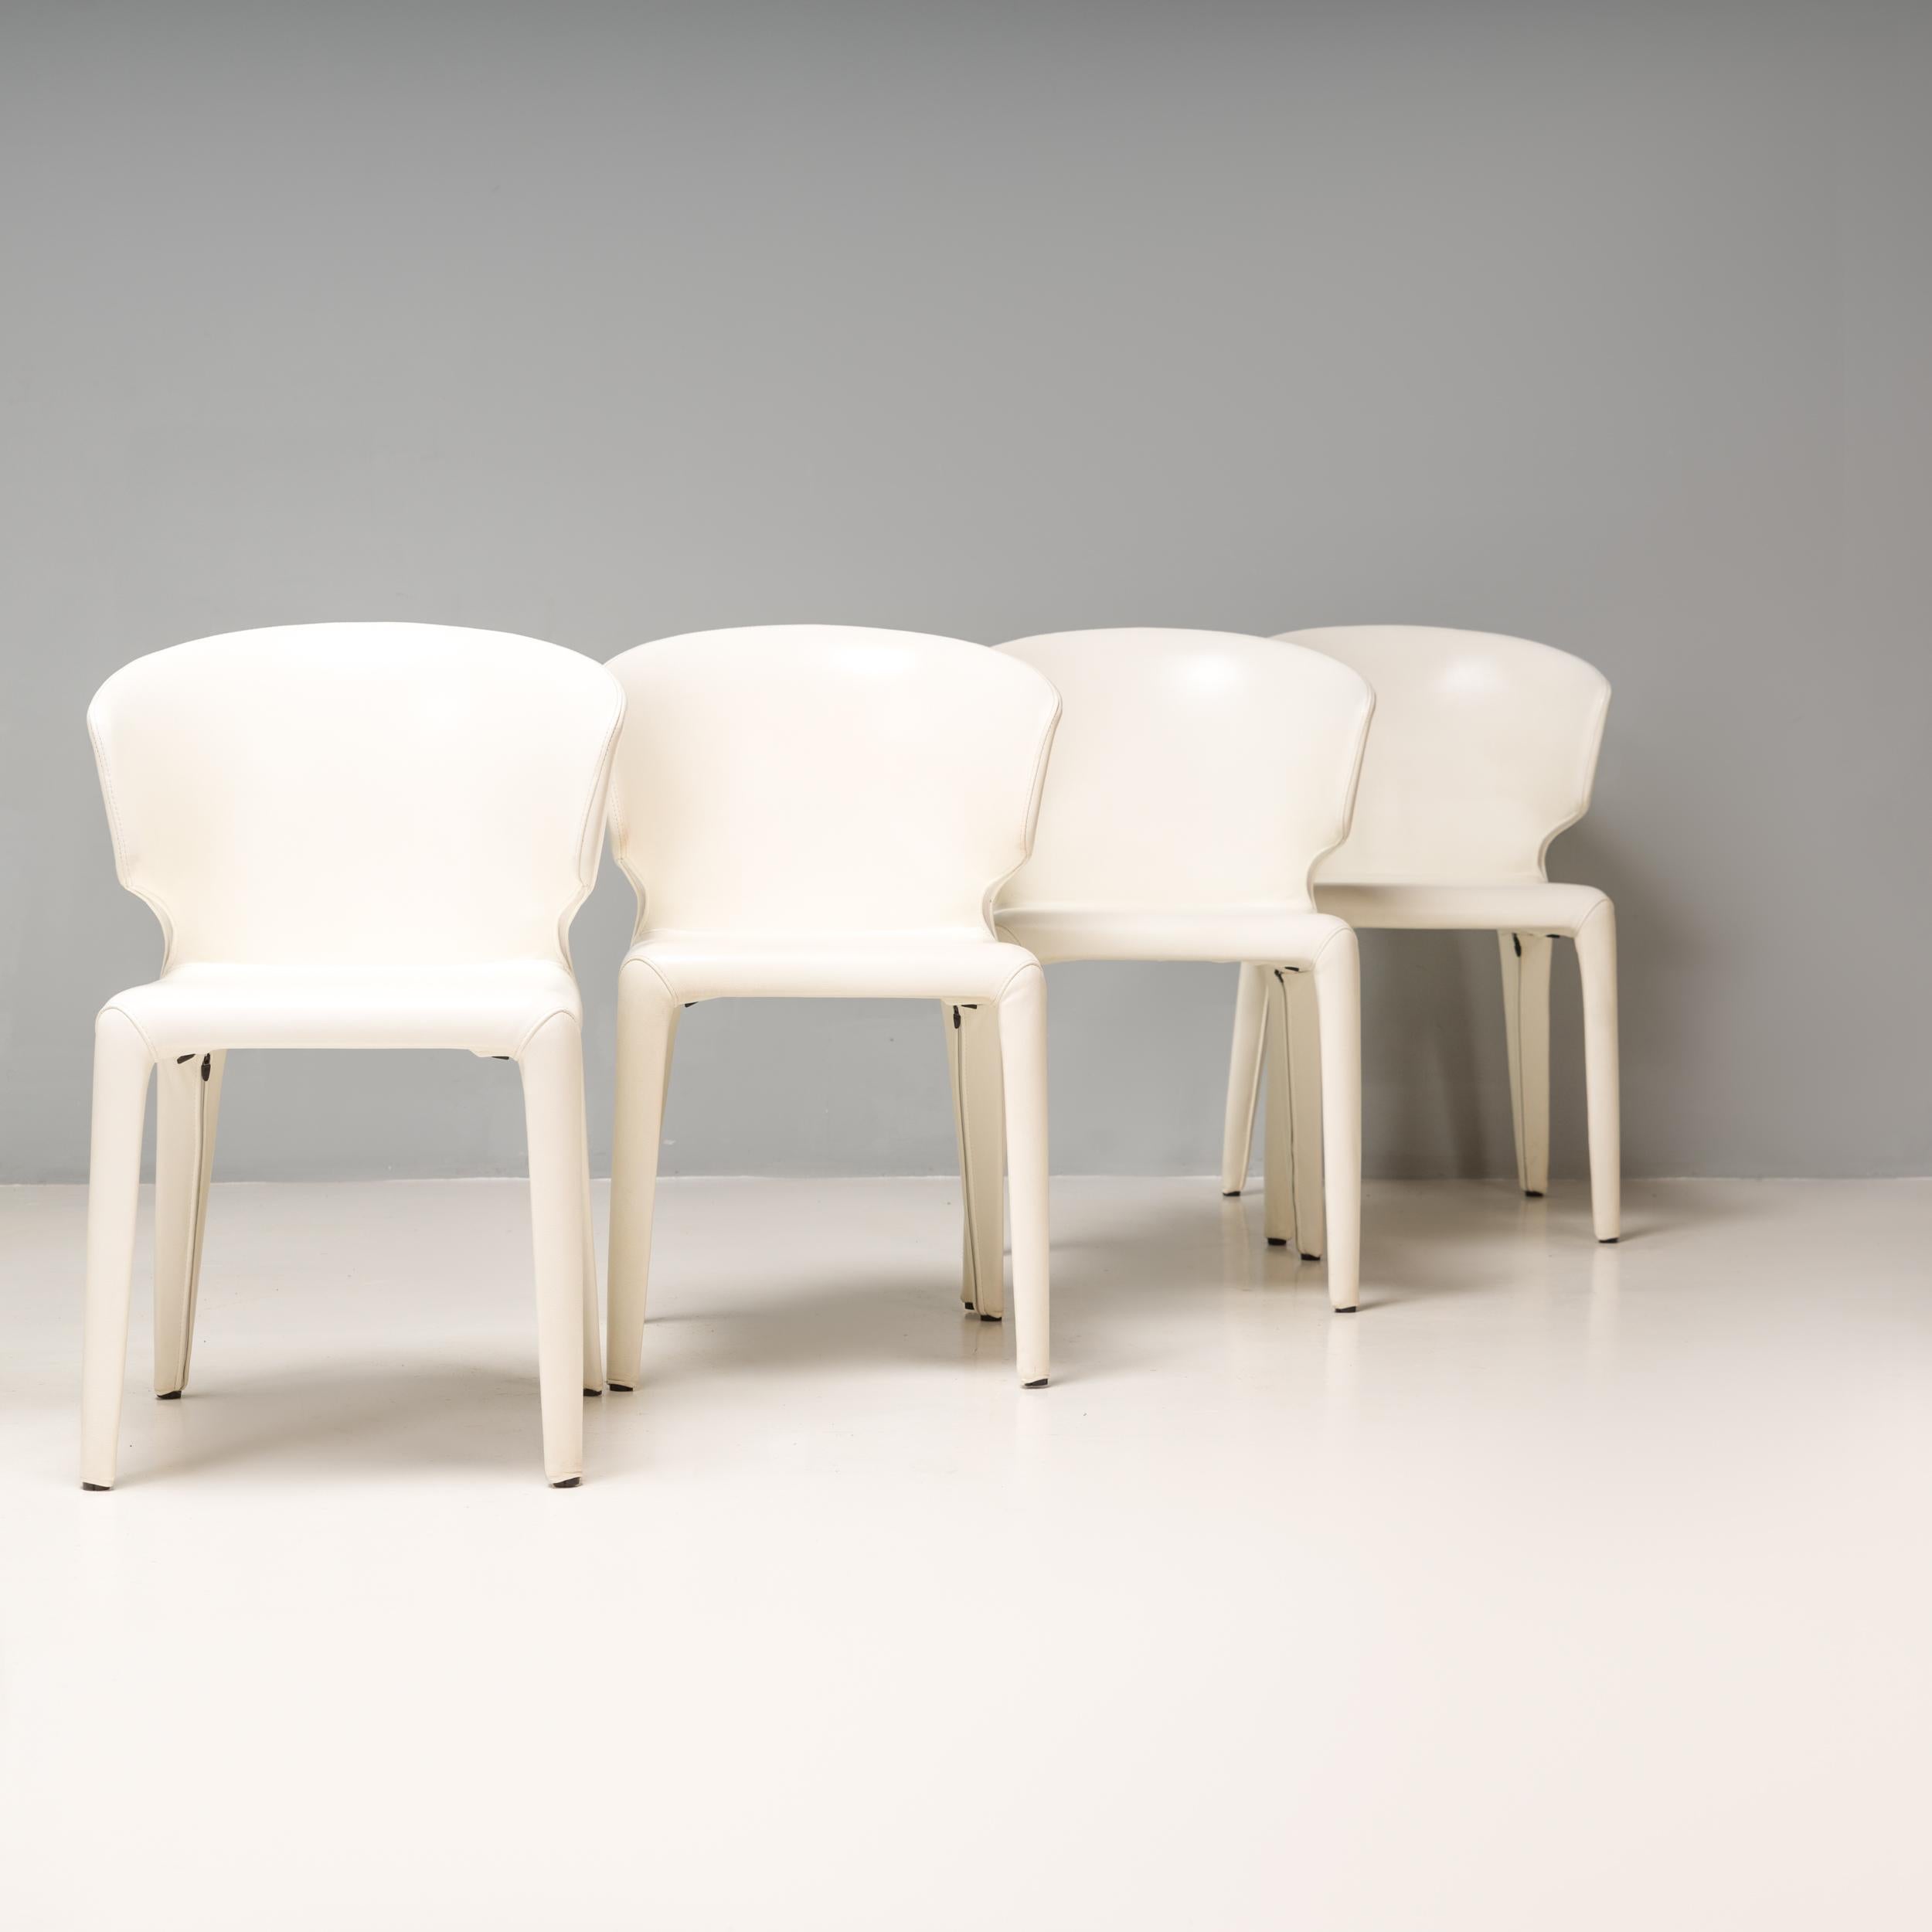 Italian Cassina by Hannes Wettstein 367 Hola White Leather Dining Chairs, Set of 8